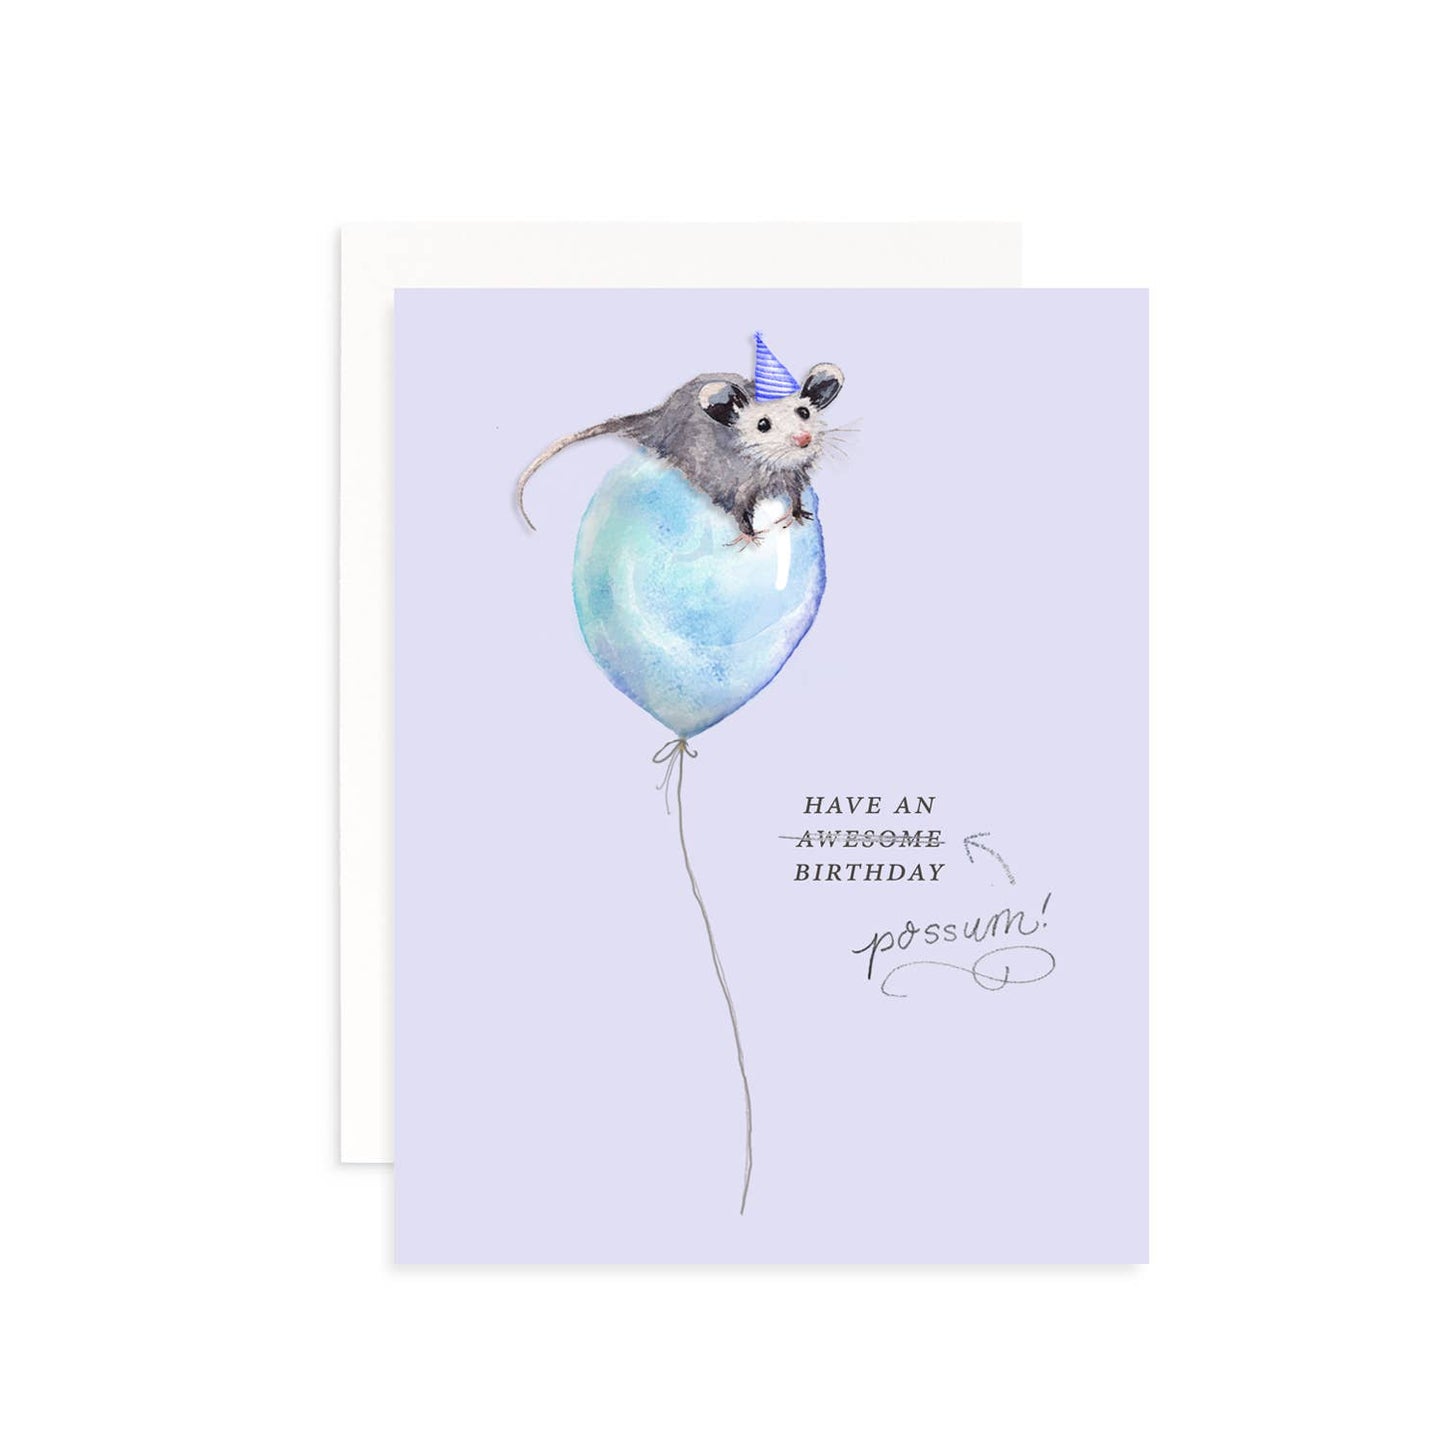 Have An Awesome (Possum!) Birthday Greeting Card: Boxed Set of 6